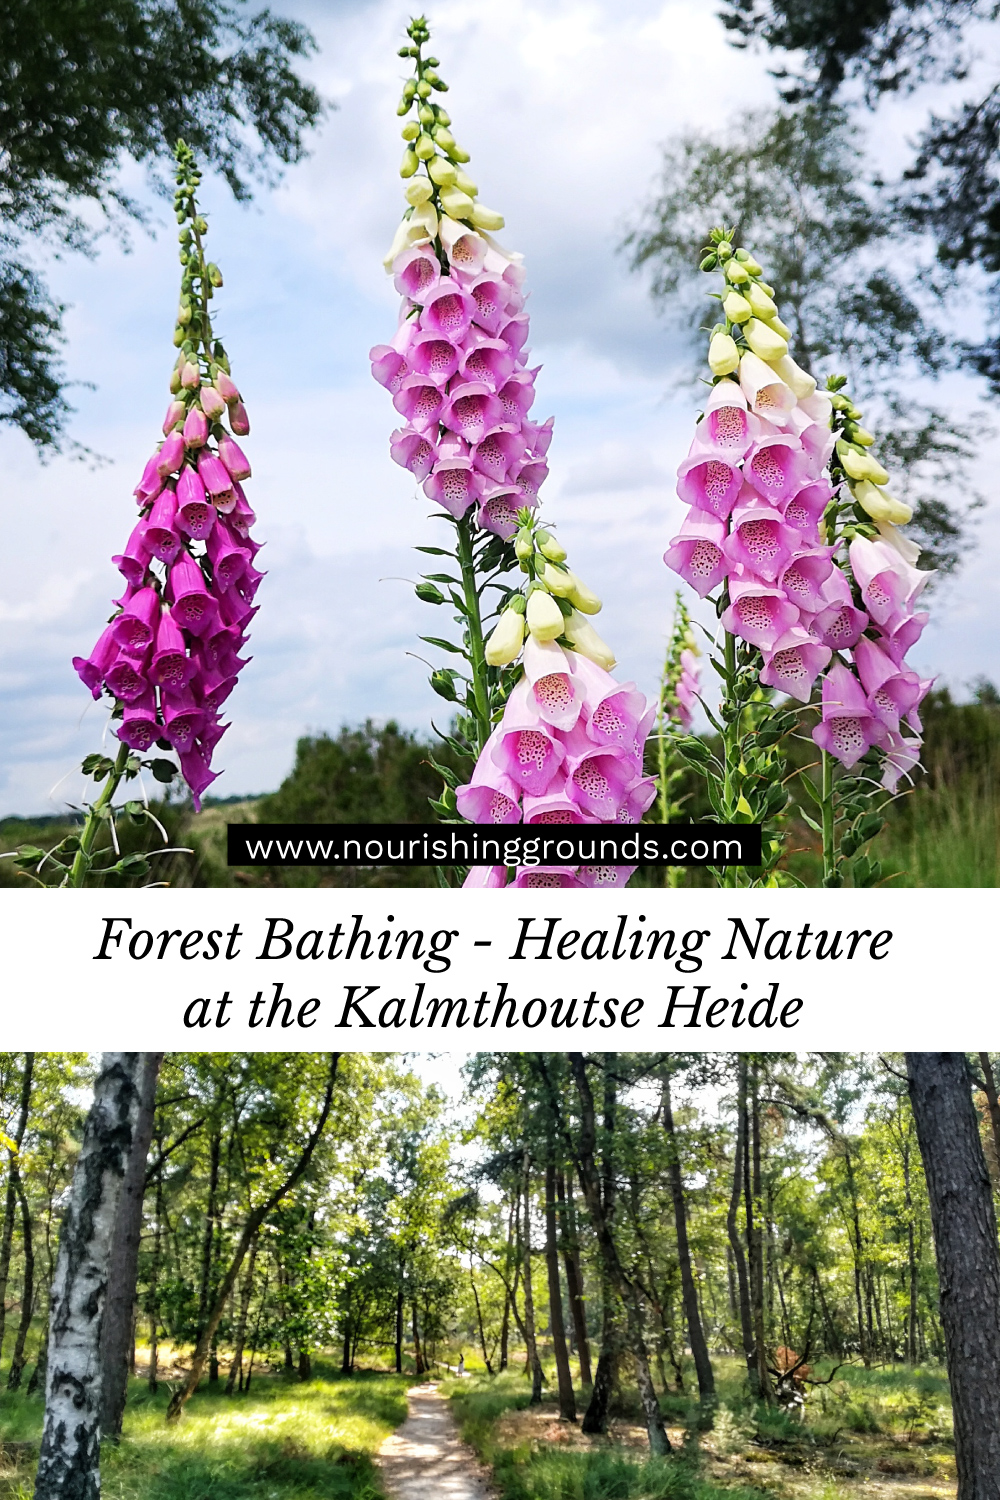 Forest Bathing - Healing Nature at the Kalmthoutse Heide